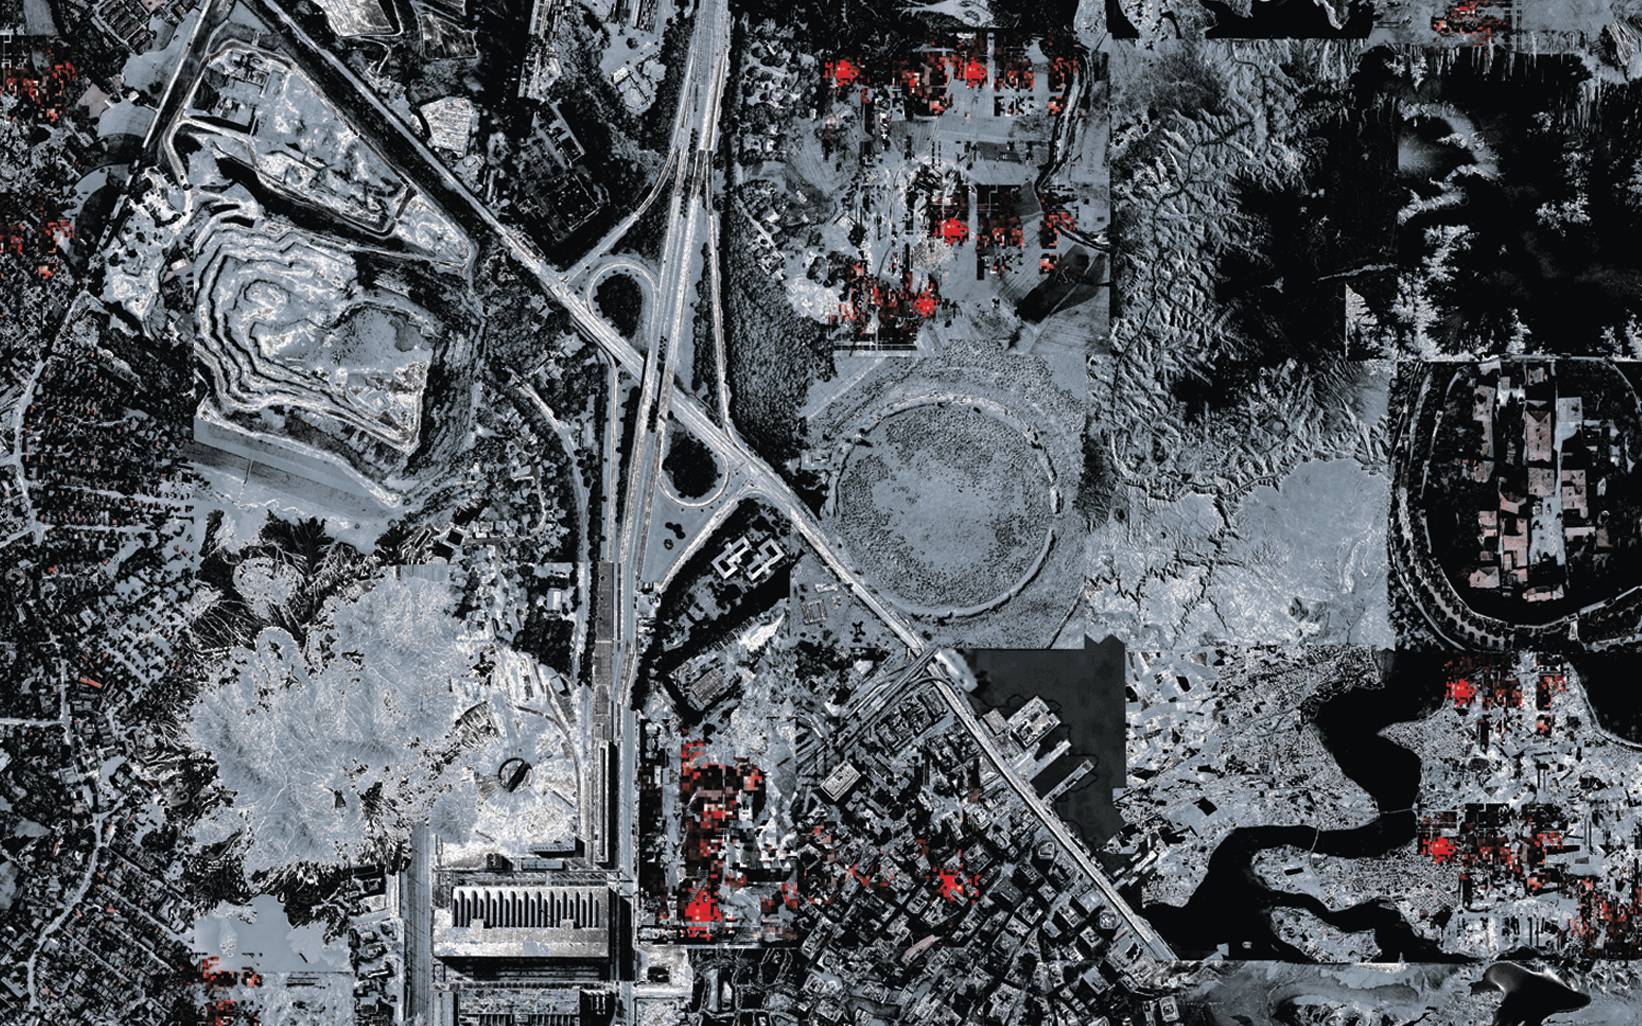 Image: Compressed Landscape, from 'Beyond the Grid: Territories of Resolution', by Carolina Safieddine, Jiahua Dong, Kun Luo and Yandong Liu, Urban Design MArch, RC19, 2021